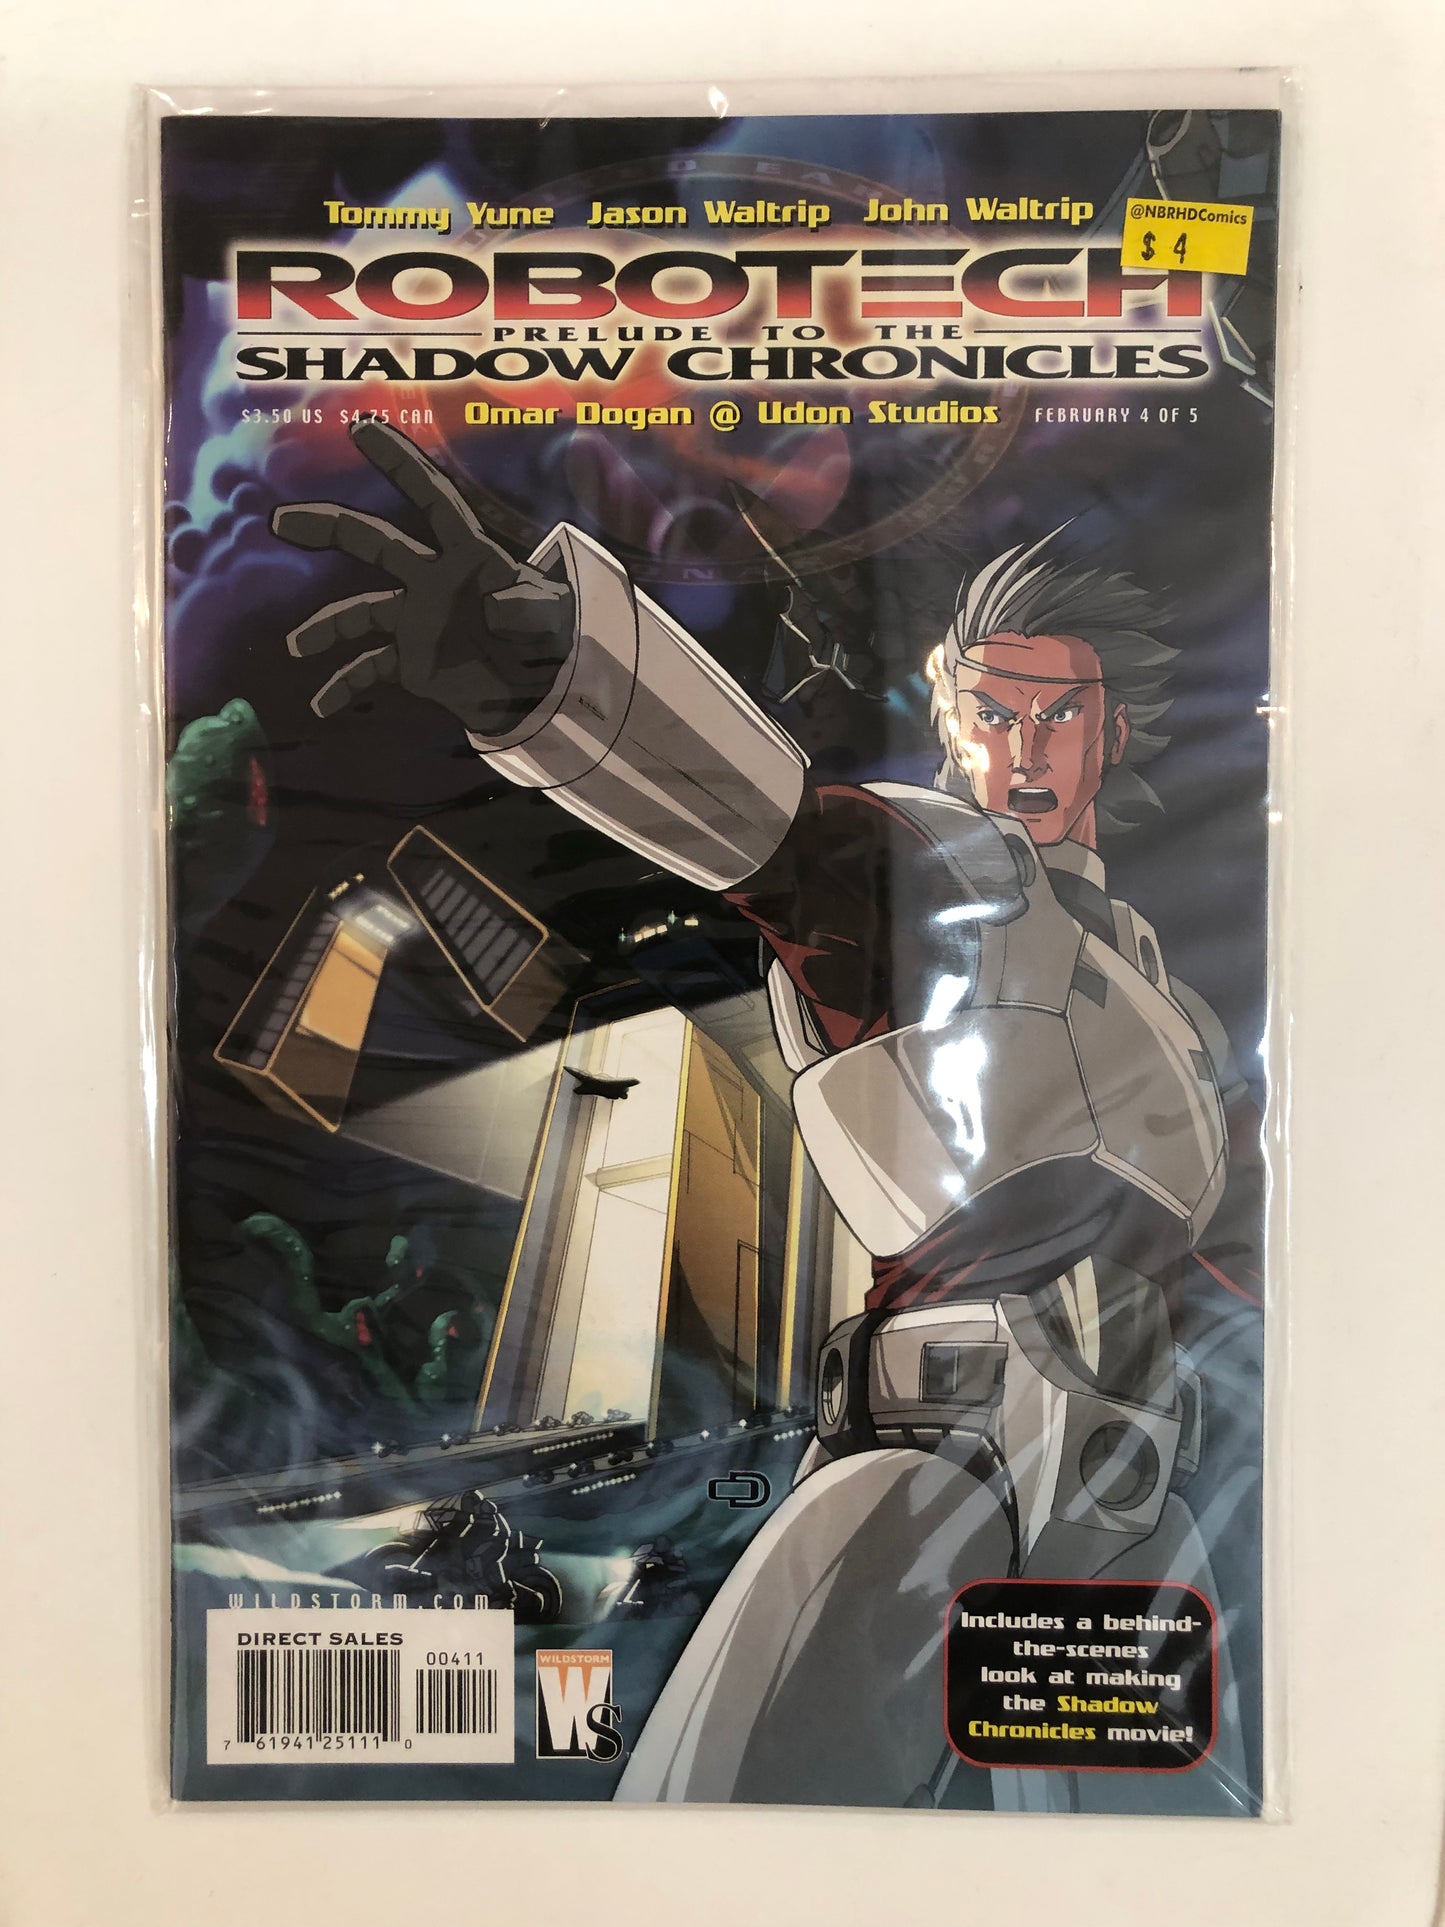 Robotech: Prelude to The Shadow Chronicles #4 of 5